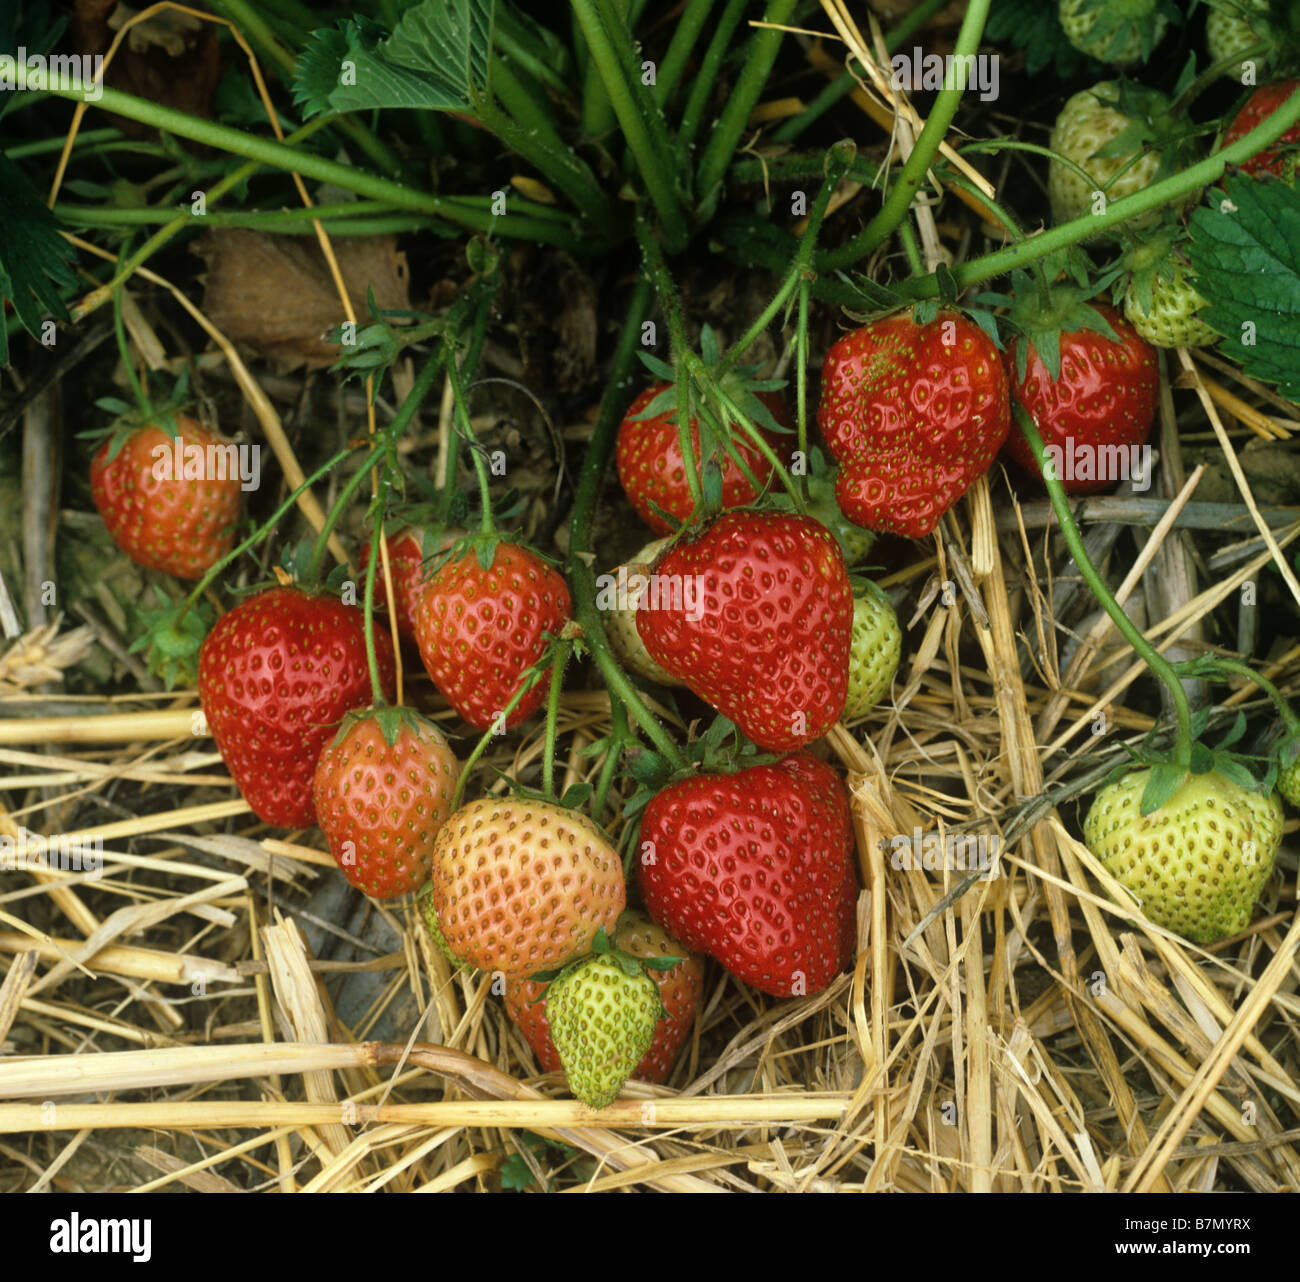 English strawberry crop in fruit with straw mulch between the rows Stock Photo